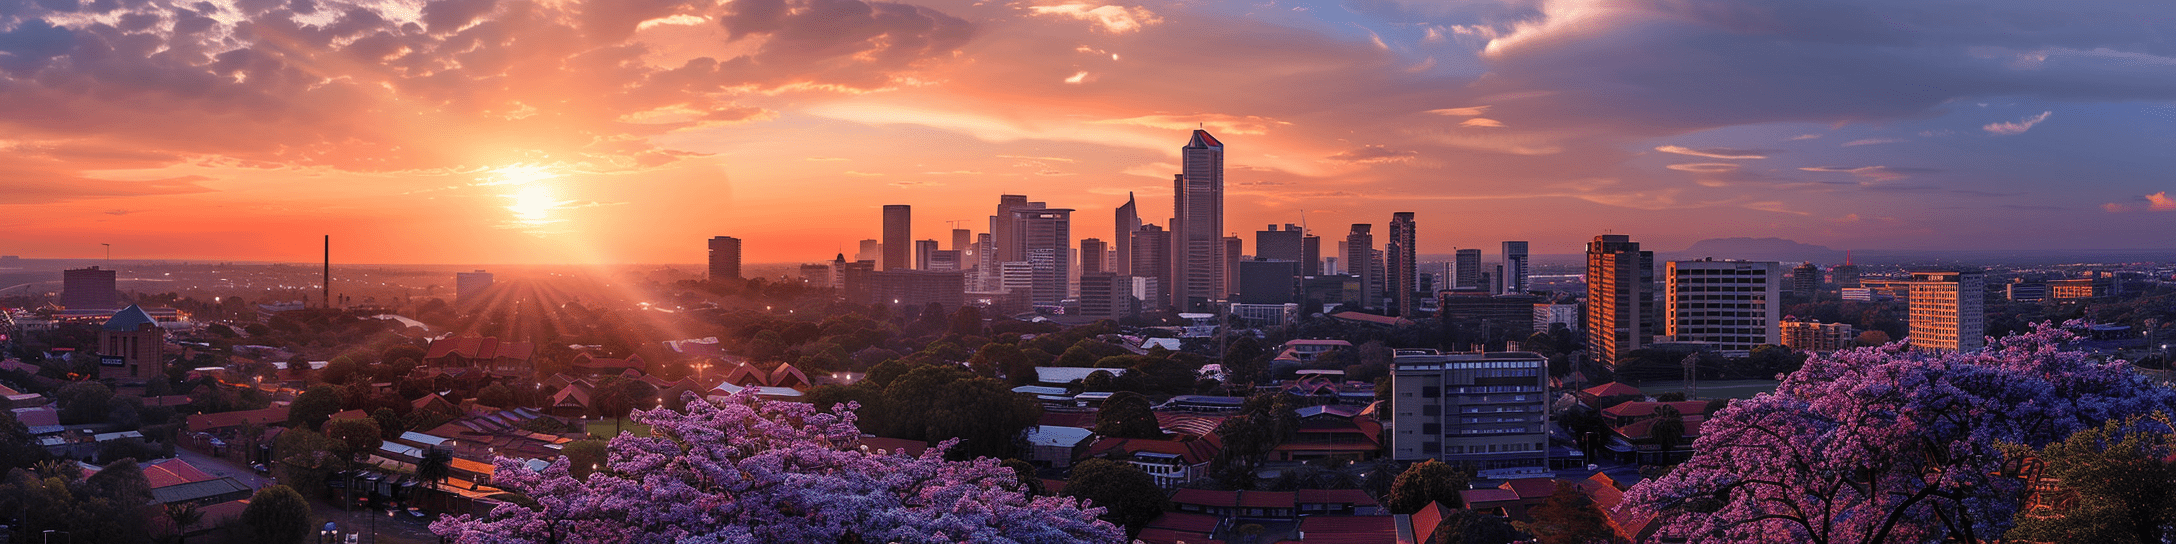 Sunset in Sandton with iconic jacaranda trees in bloom and city buildings silhouetted against a vibrant sky.